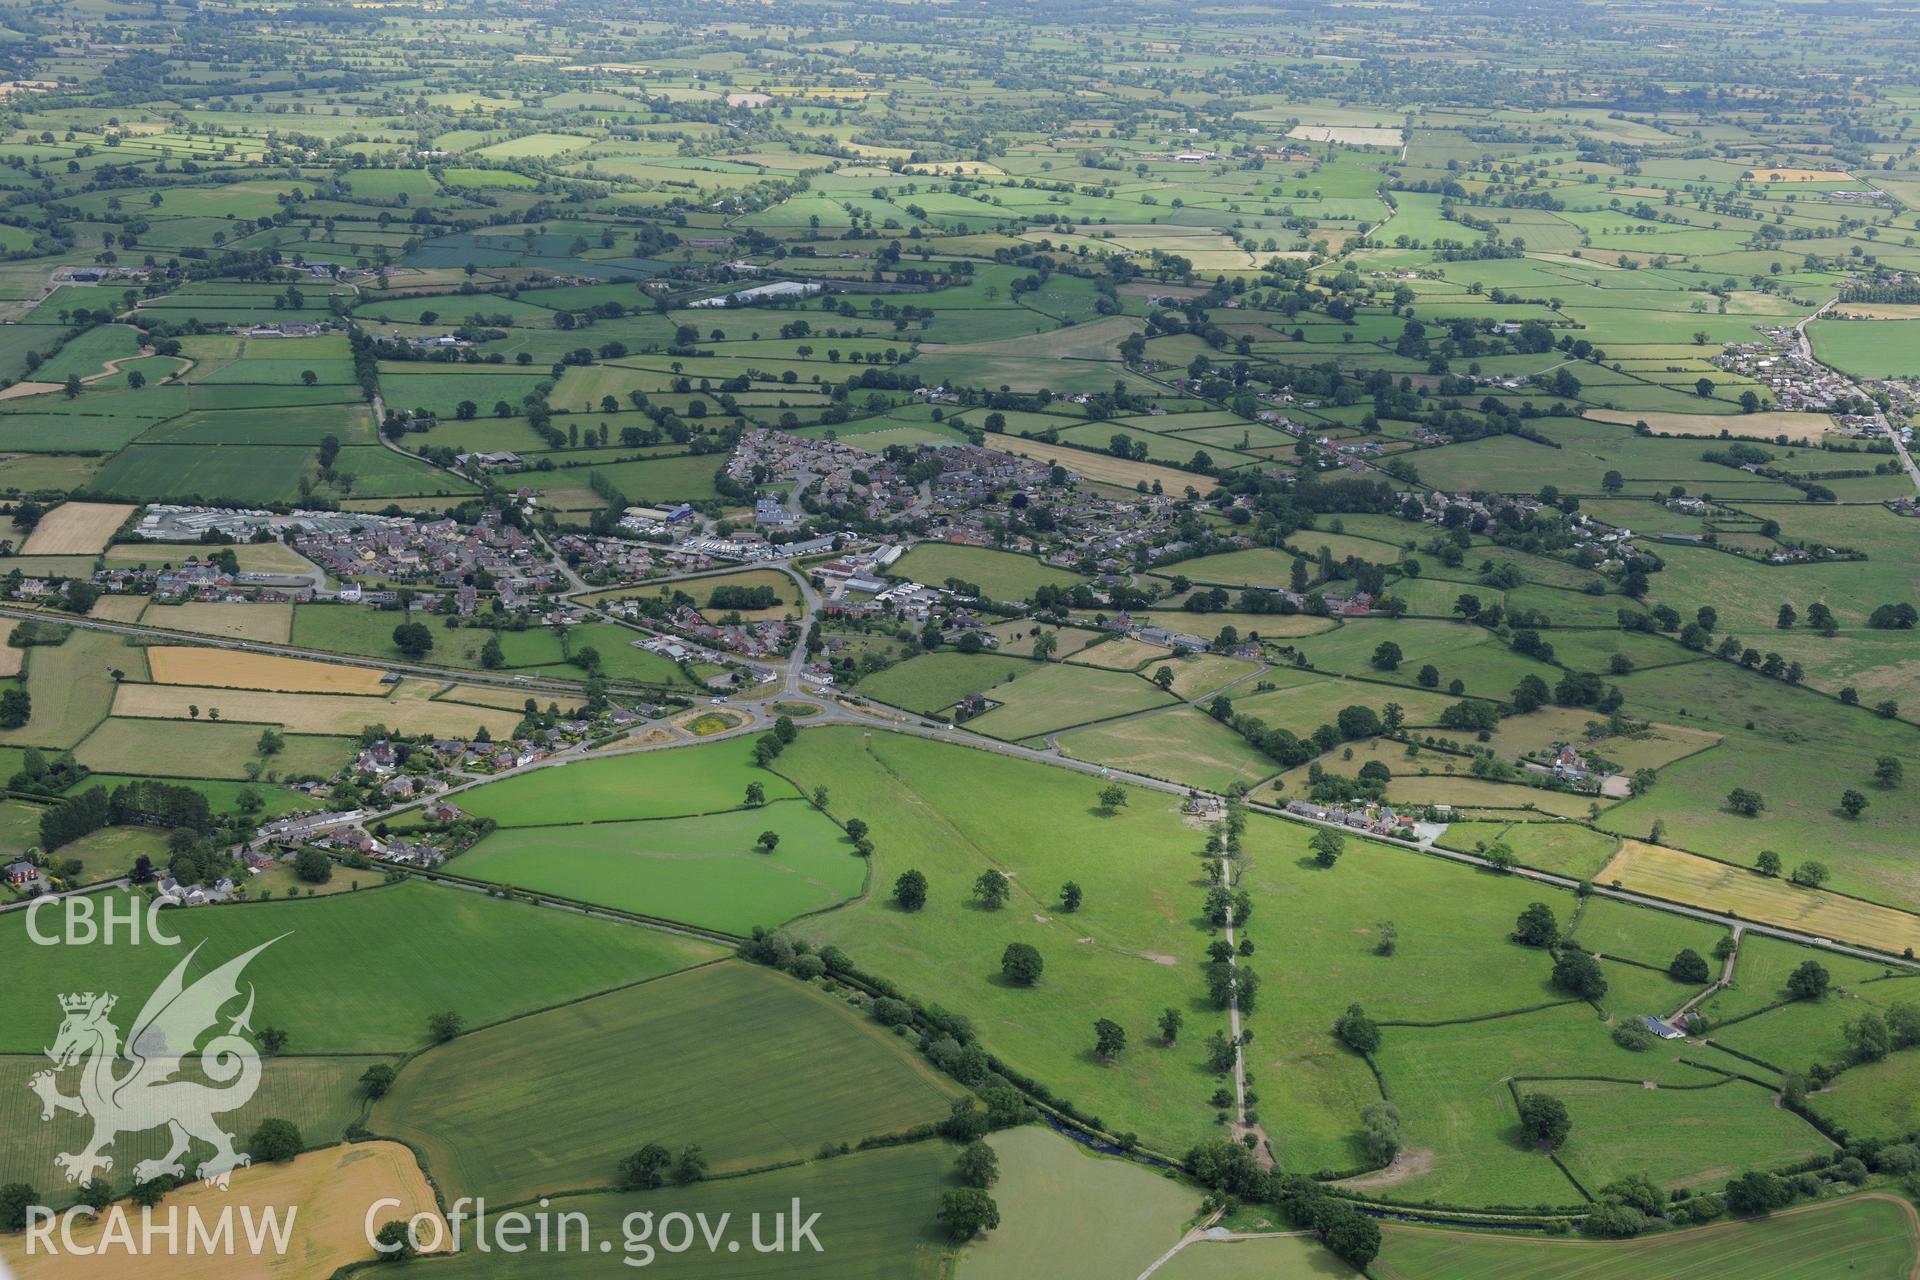 The village of Four Crosses, between Welshpool and Oswestry. Oblique aerial photograph taken during the Royal Commission's programme of archaeological aerial reconnaissance by Toby Driver on 30th June 2015.